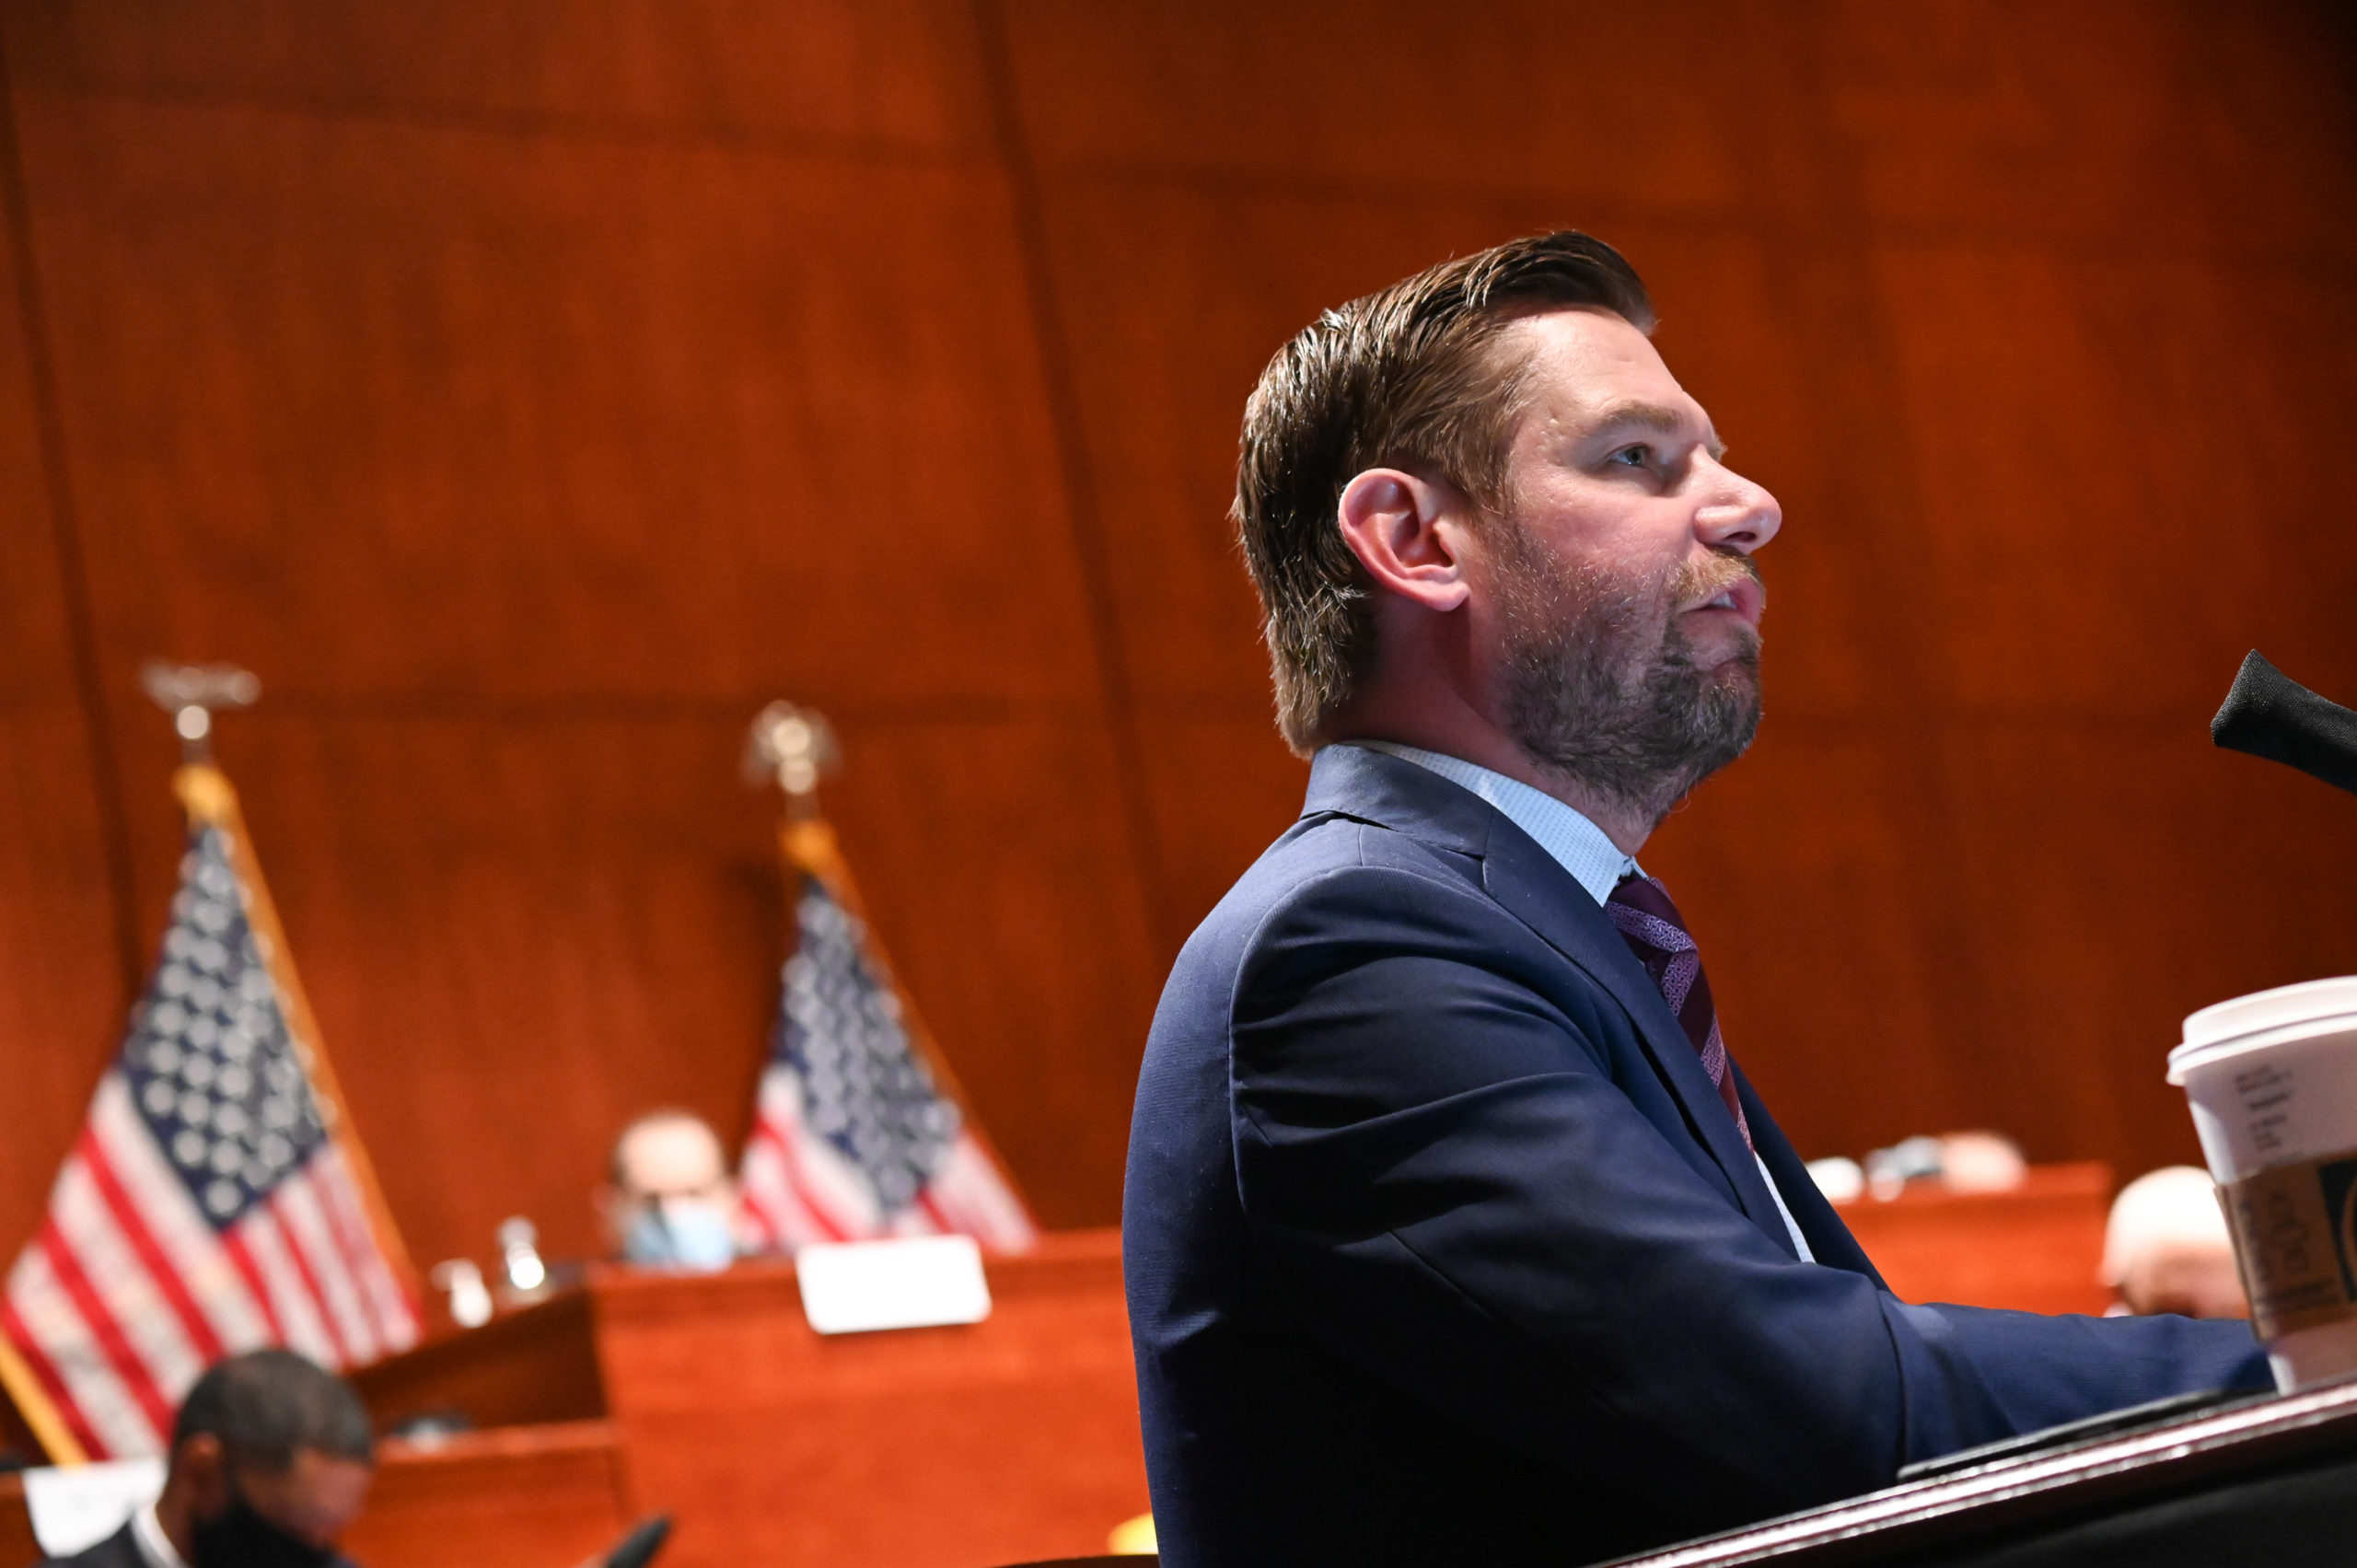 WASHINGTON, DC - JUNE 17: Representative Eric Swalwell, a Democrat from California, speaks during a markup on H.R. 7120, the "Justice in Policing Act of 2020," on June 17, 2020, in Washington, D.C. The House bill would make it easier to prosecute and sue officers and would ban federal officers from using choke holds, bar racial profiling, end "no-knock" search warrants in drug cases, create a national registry for police violations, and require local police departments that get federal funds to conduct bias training. (Photo by Erin Scott-Pool via Getty Images)